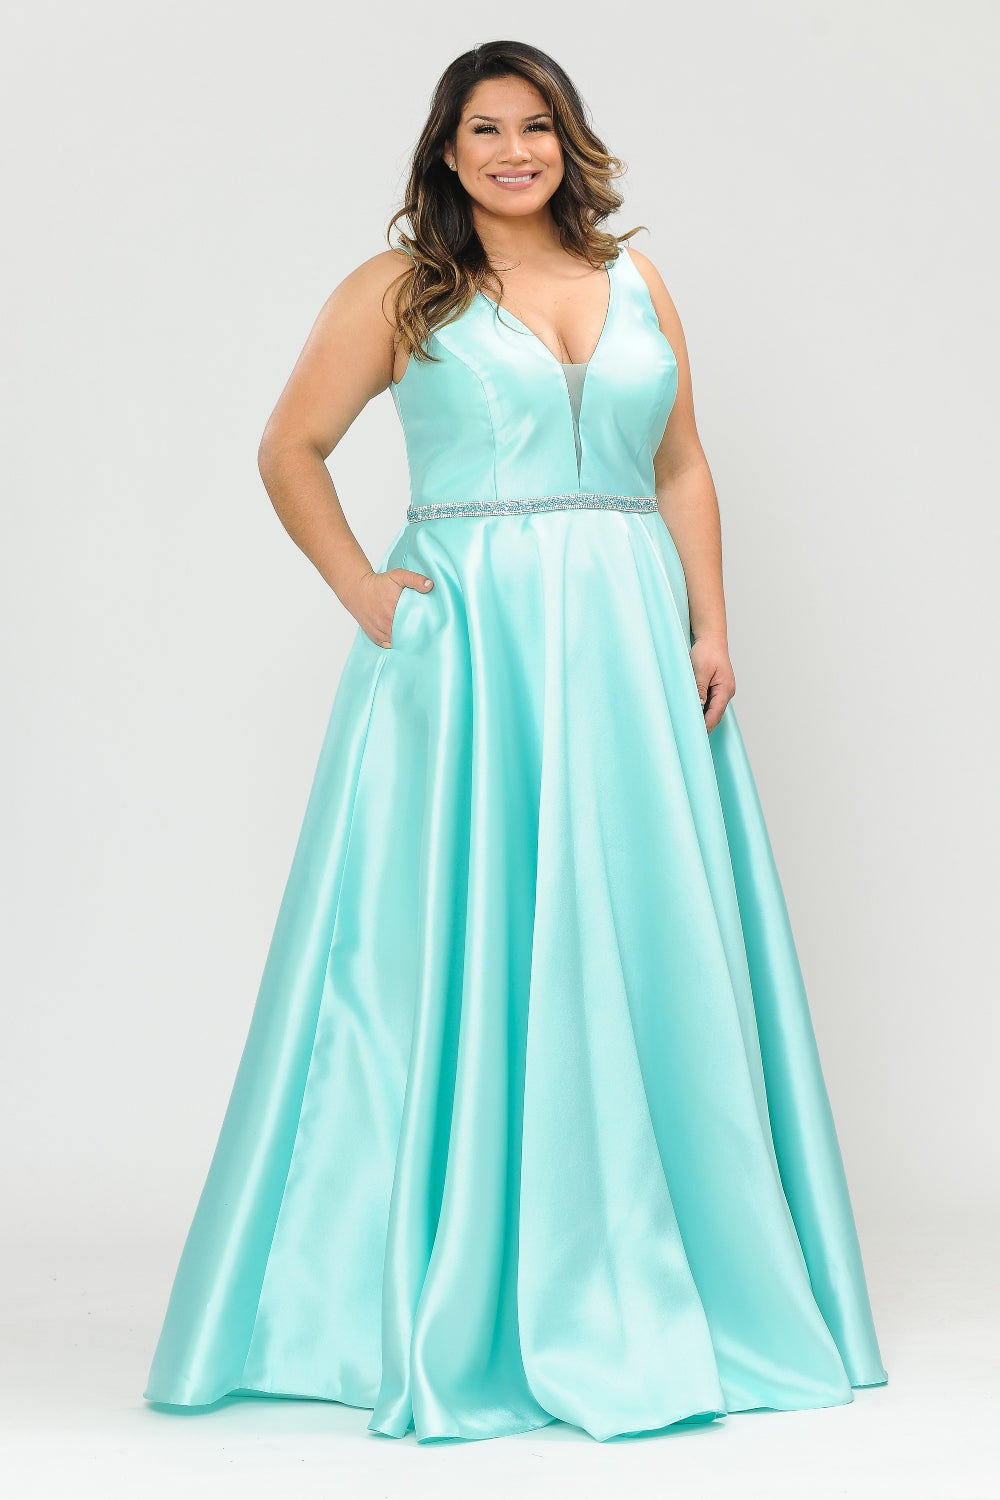 Plus Size Dresses With Corset - LAYW1108